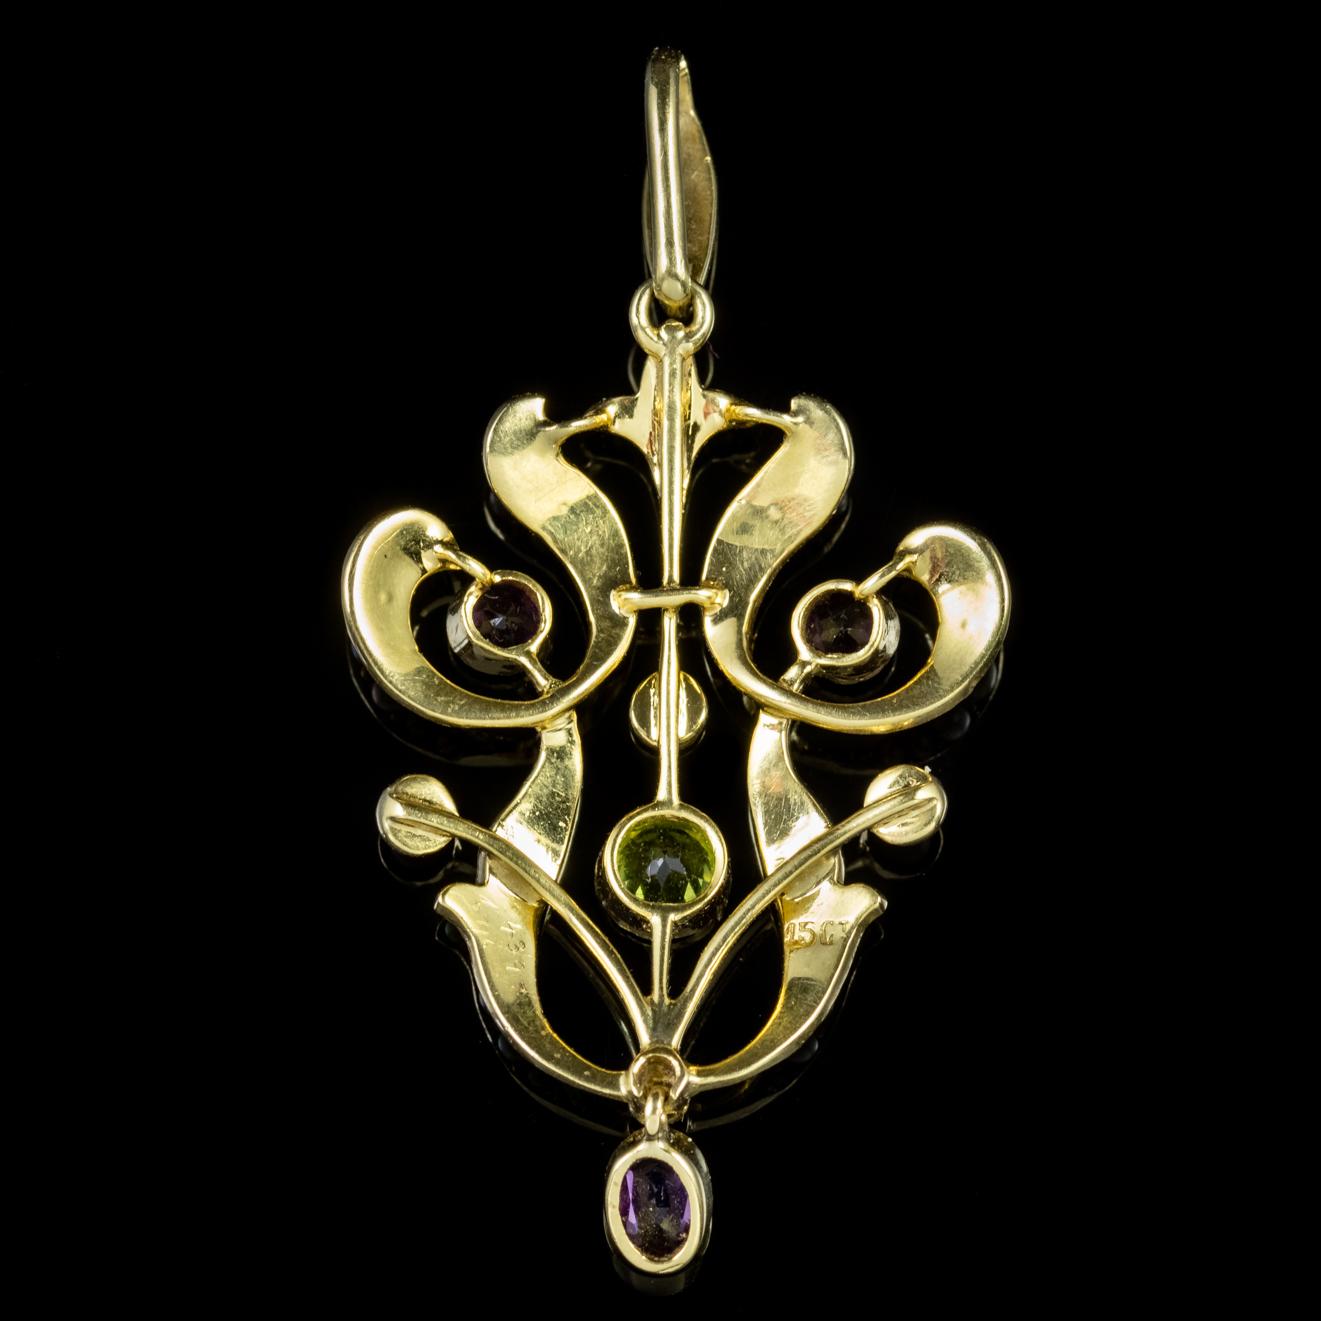 A stunning antique Suffragette pendant from the Edwardian era decorated with lustrous Pearls and three violet Amethysts with a central 0.22ct Peridot in the centre.

Suffragette jewellery was worn to show one’s allegiance to the women’s Suffragette